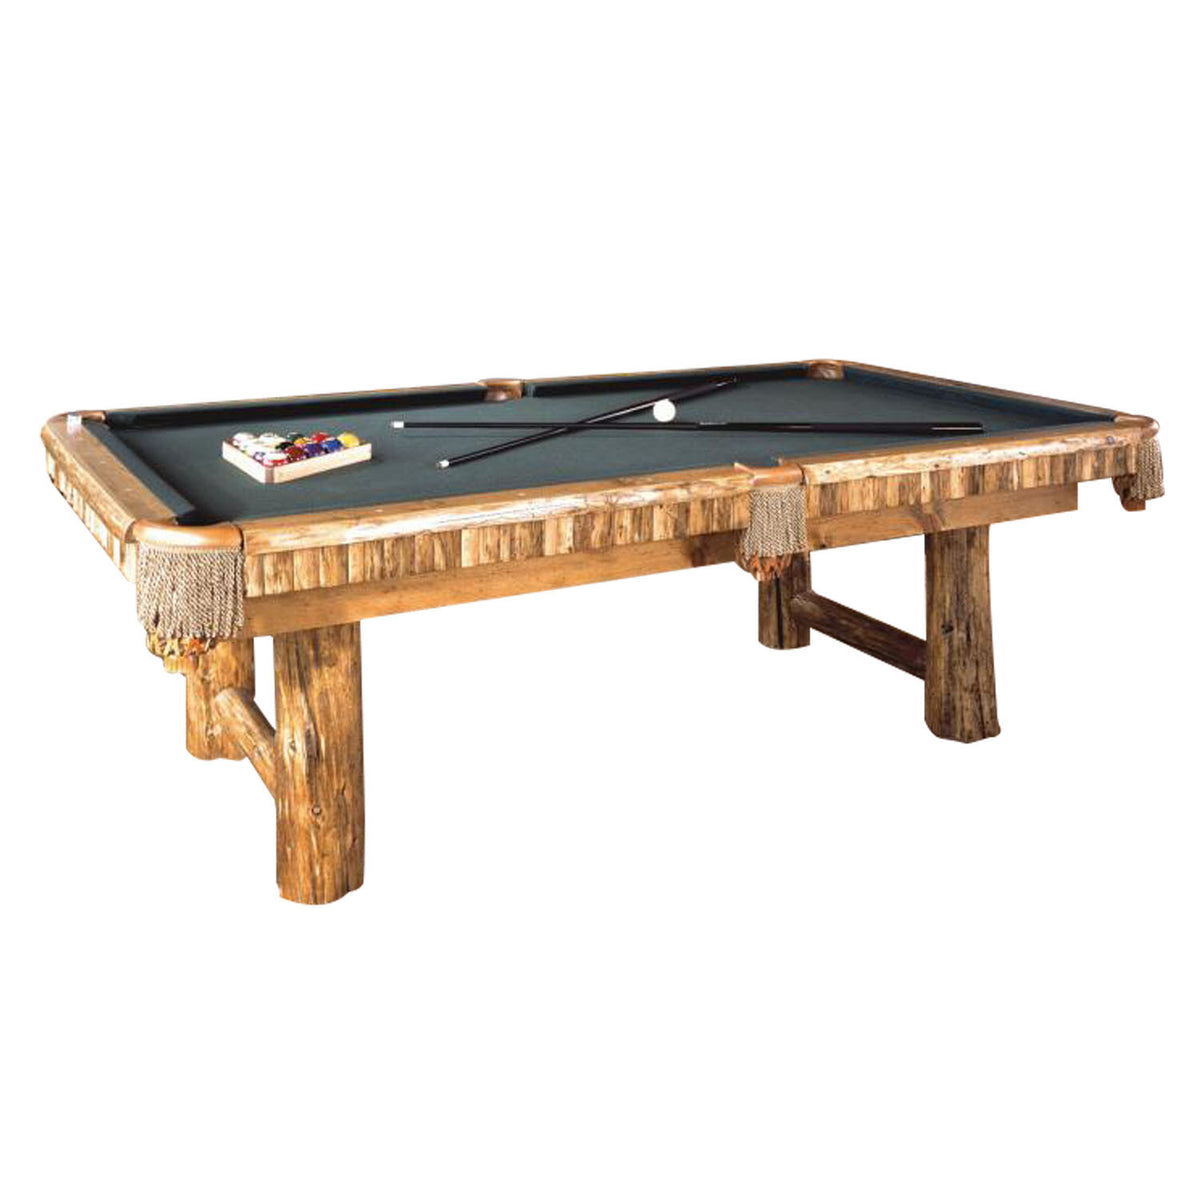 pool table new price